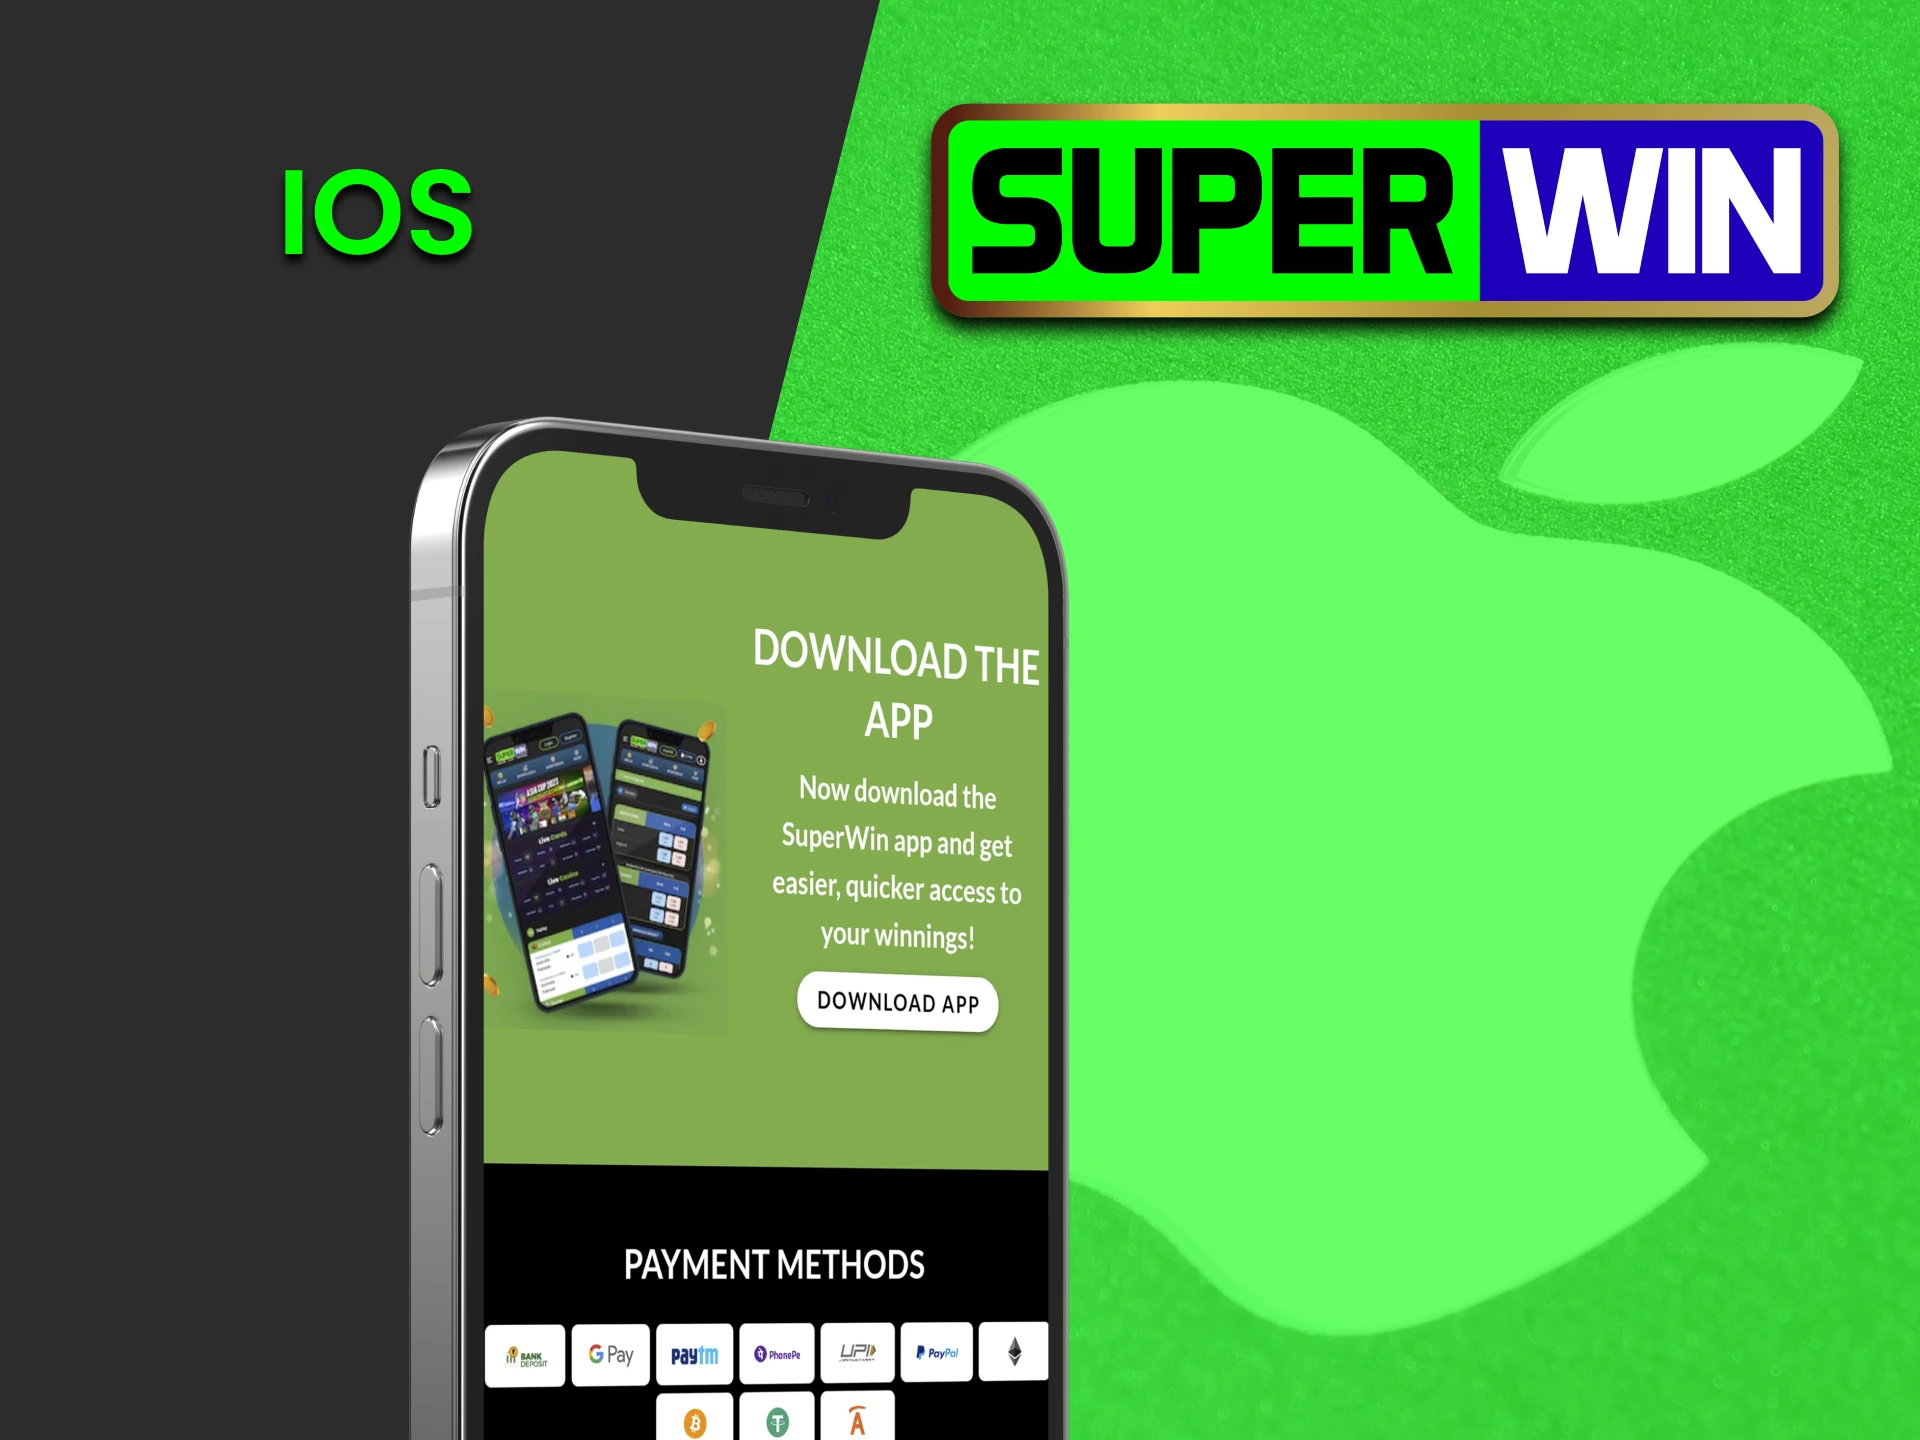 Install the Superwin application for iOS devices.